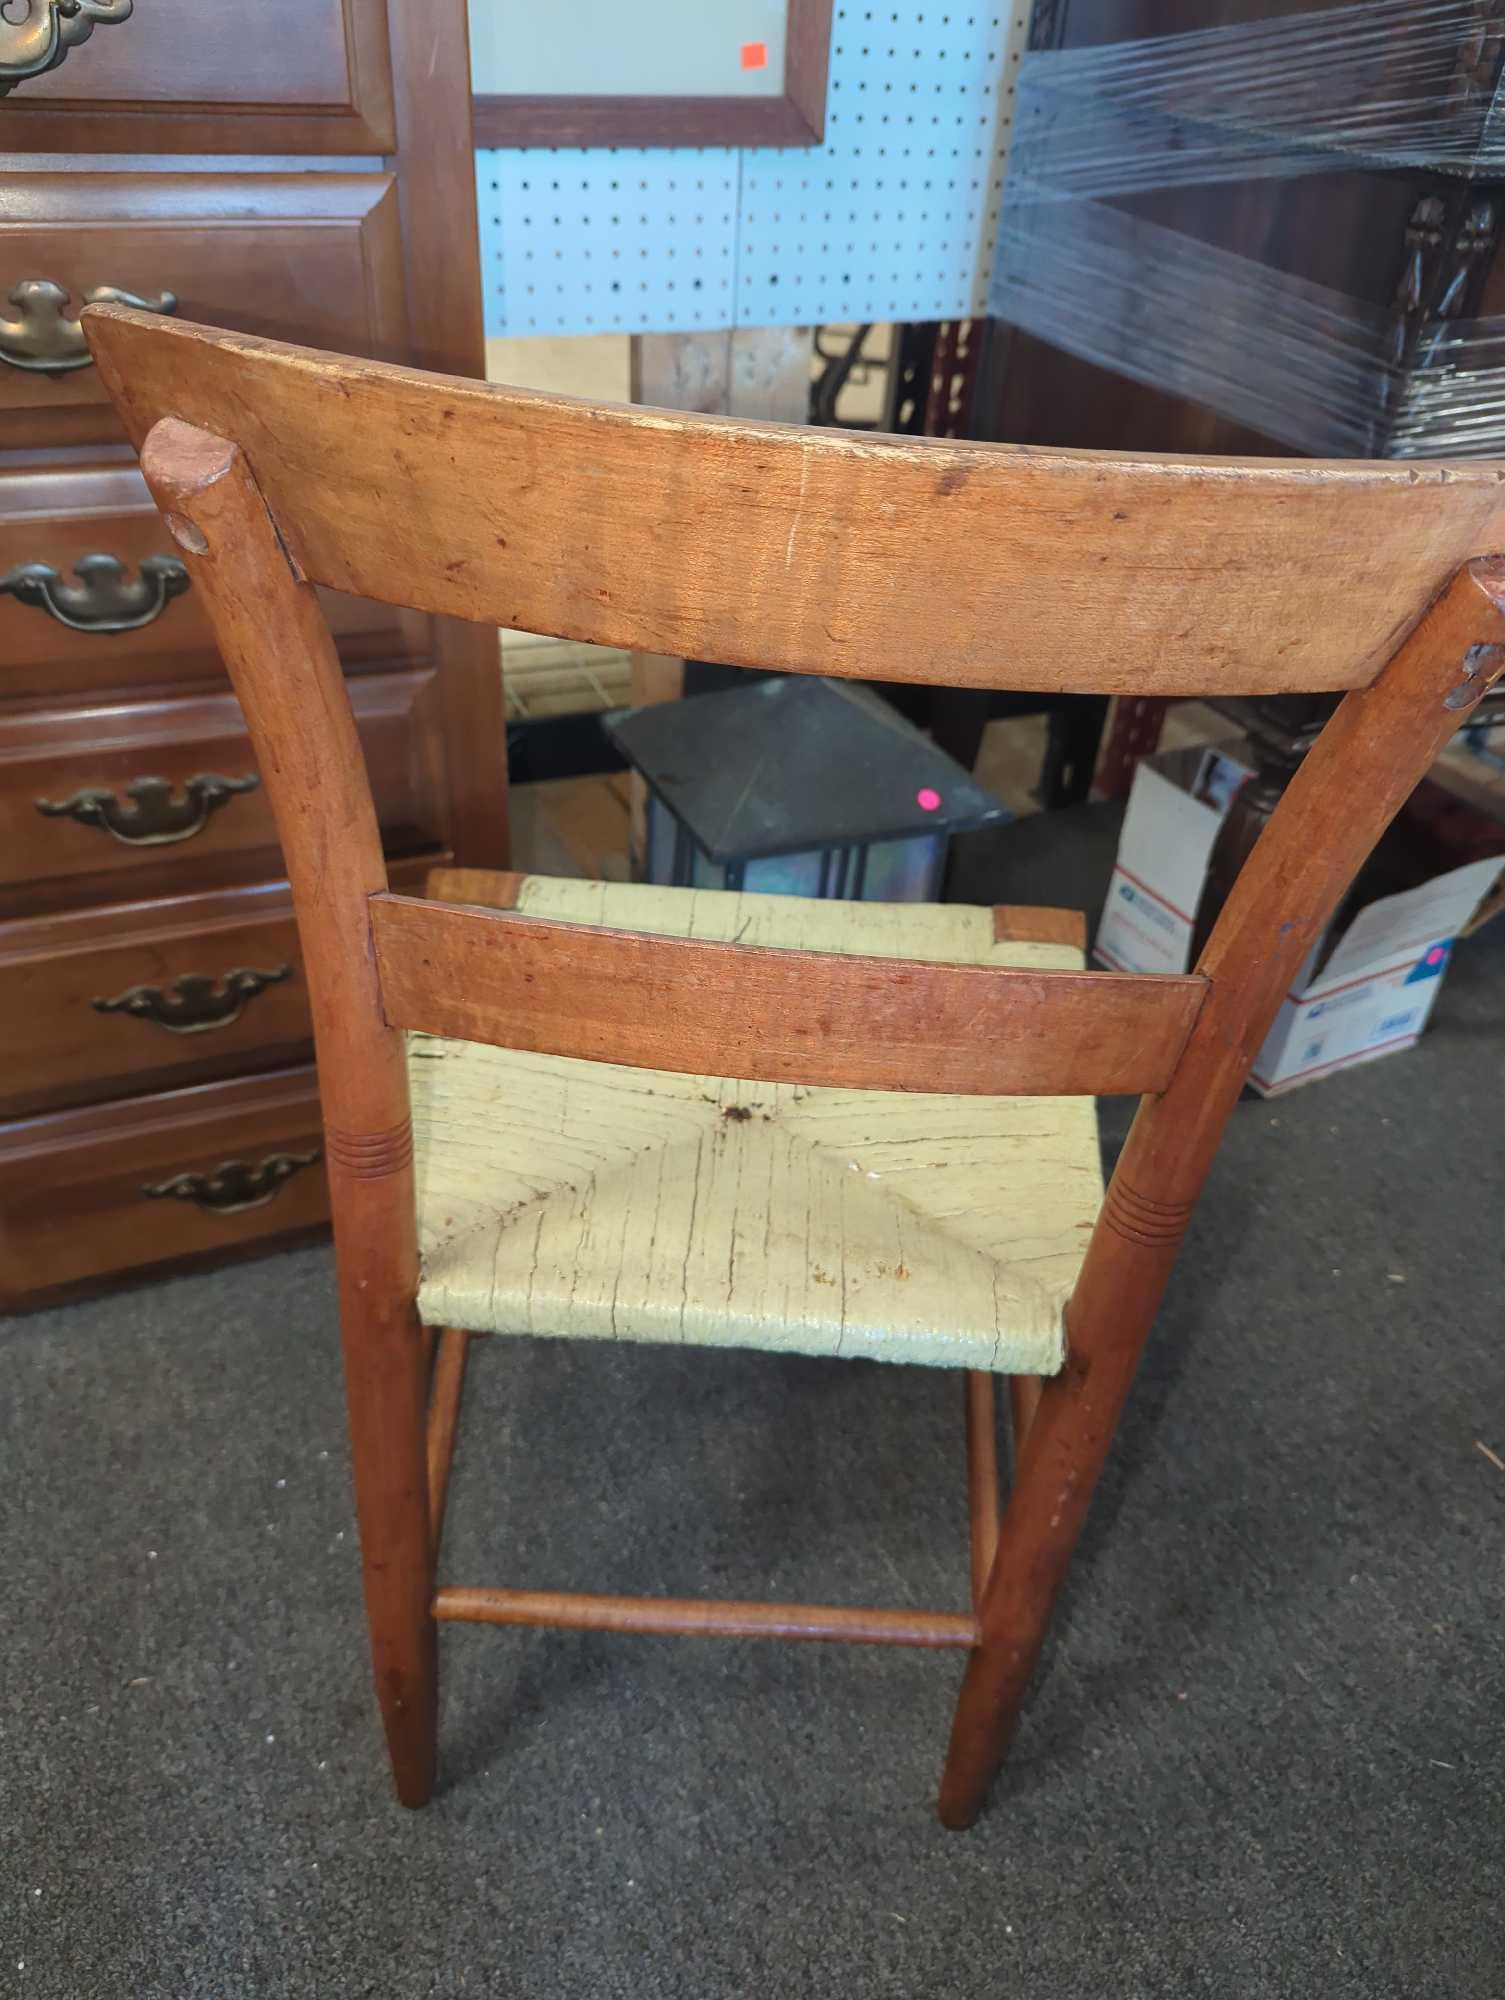 Mid 20th Century Maple Side Chair With Painted Rush Seat, Approximate Dimensions - 34" H x 17" W x